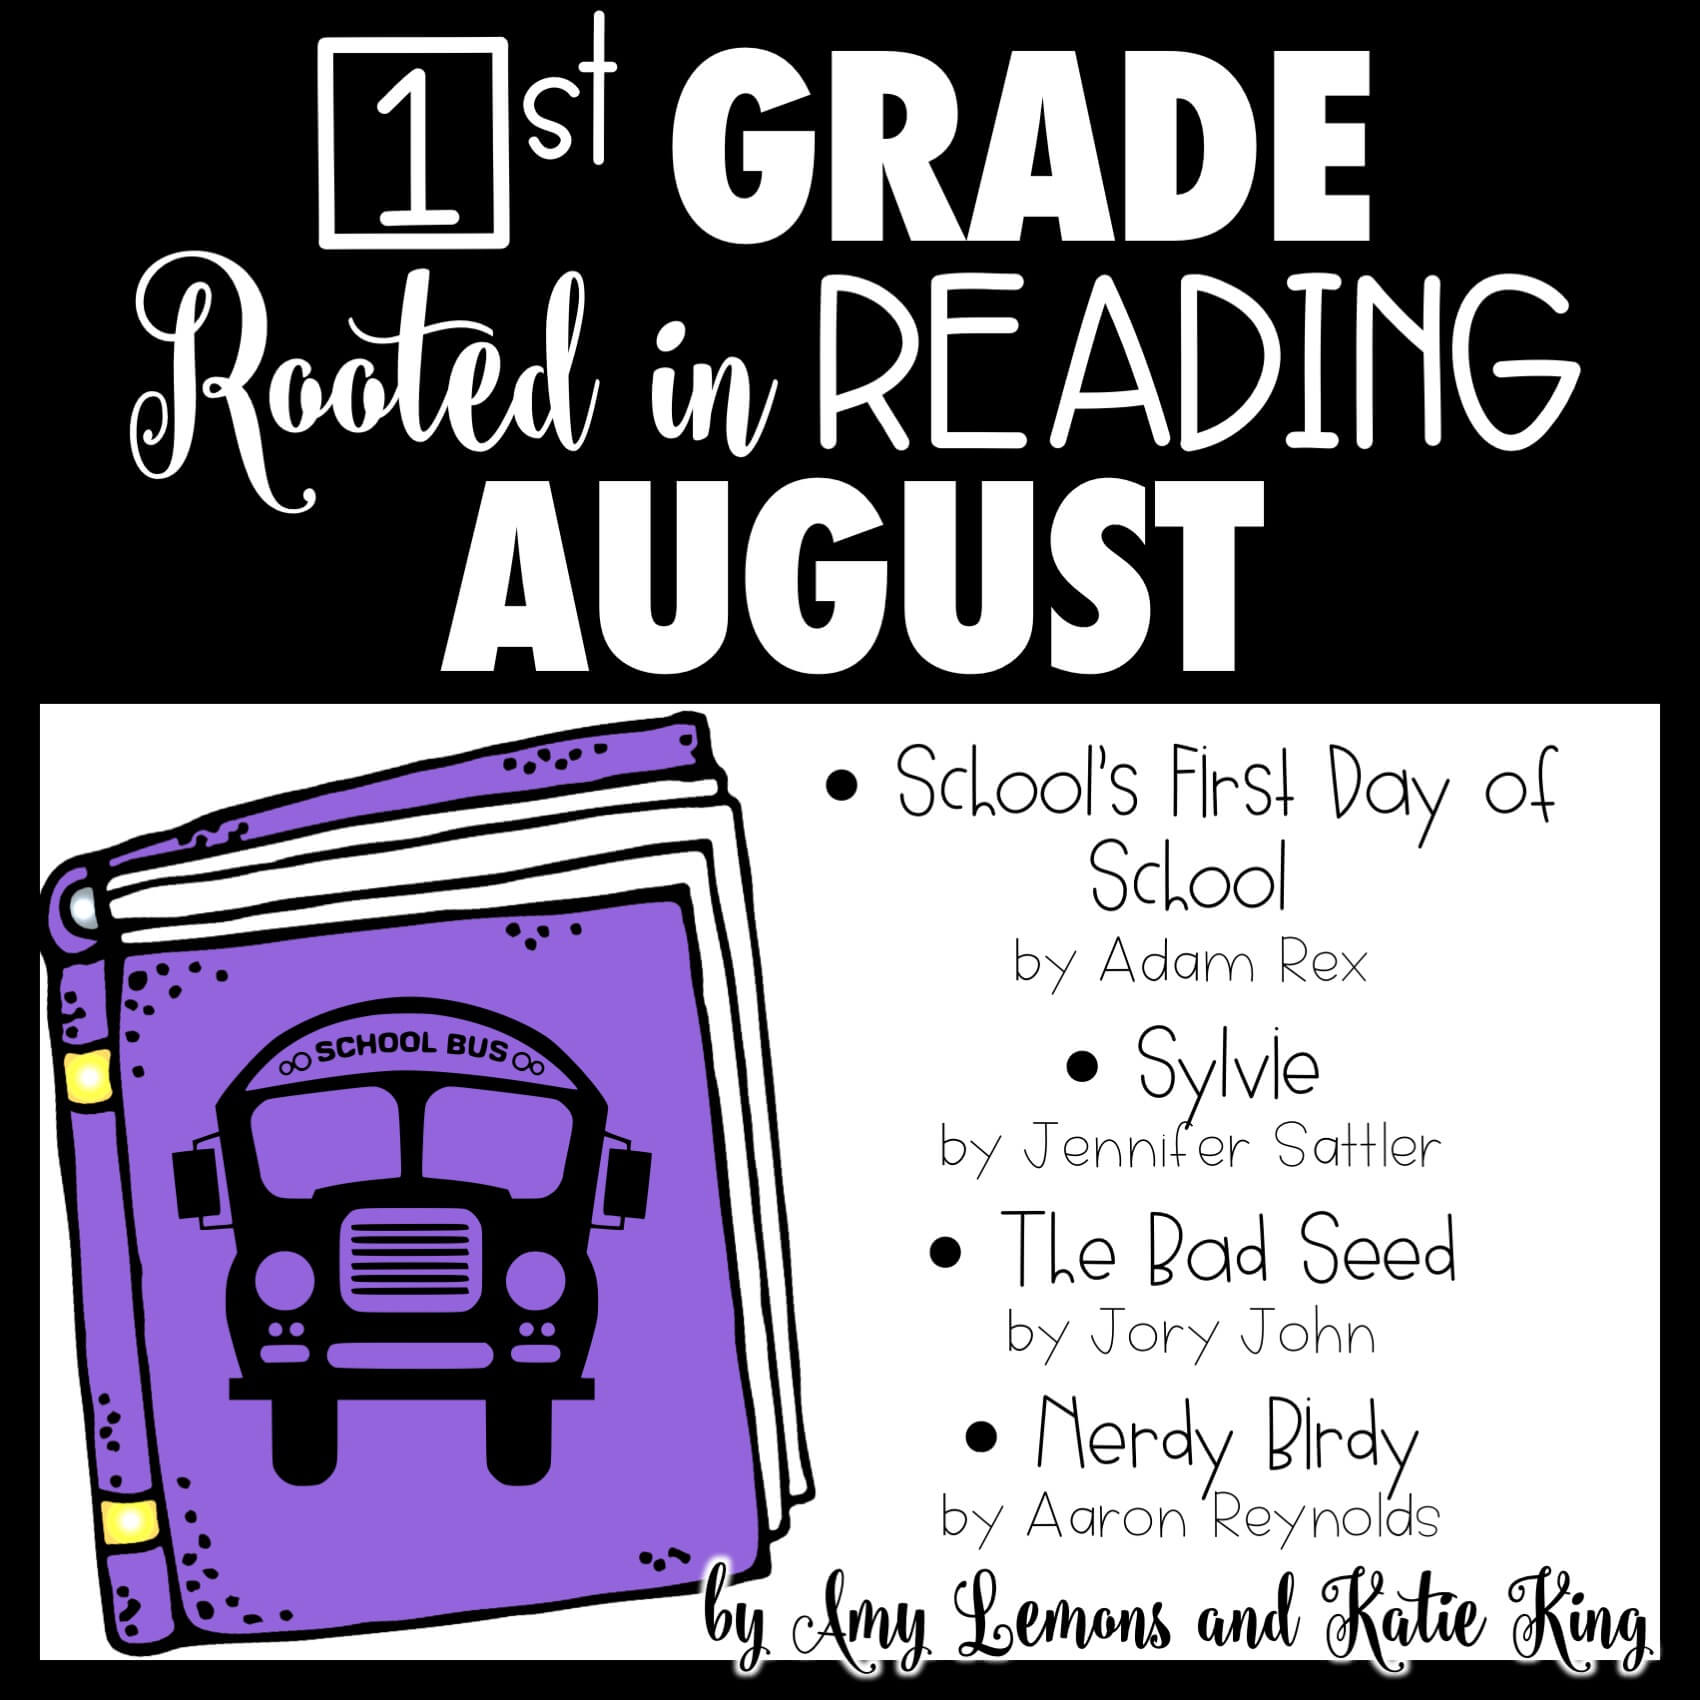 1st Grade Rooted in Reading August